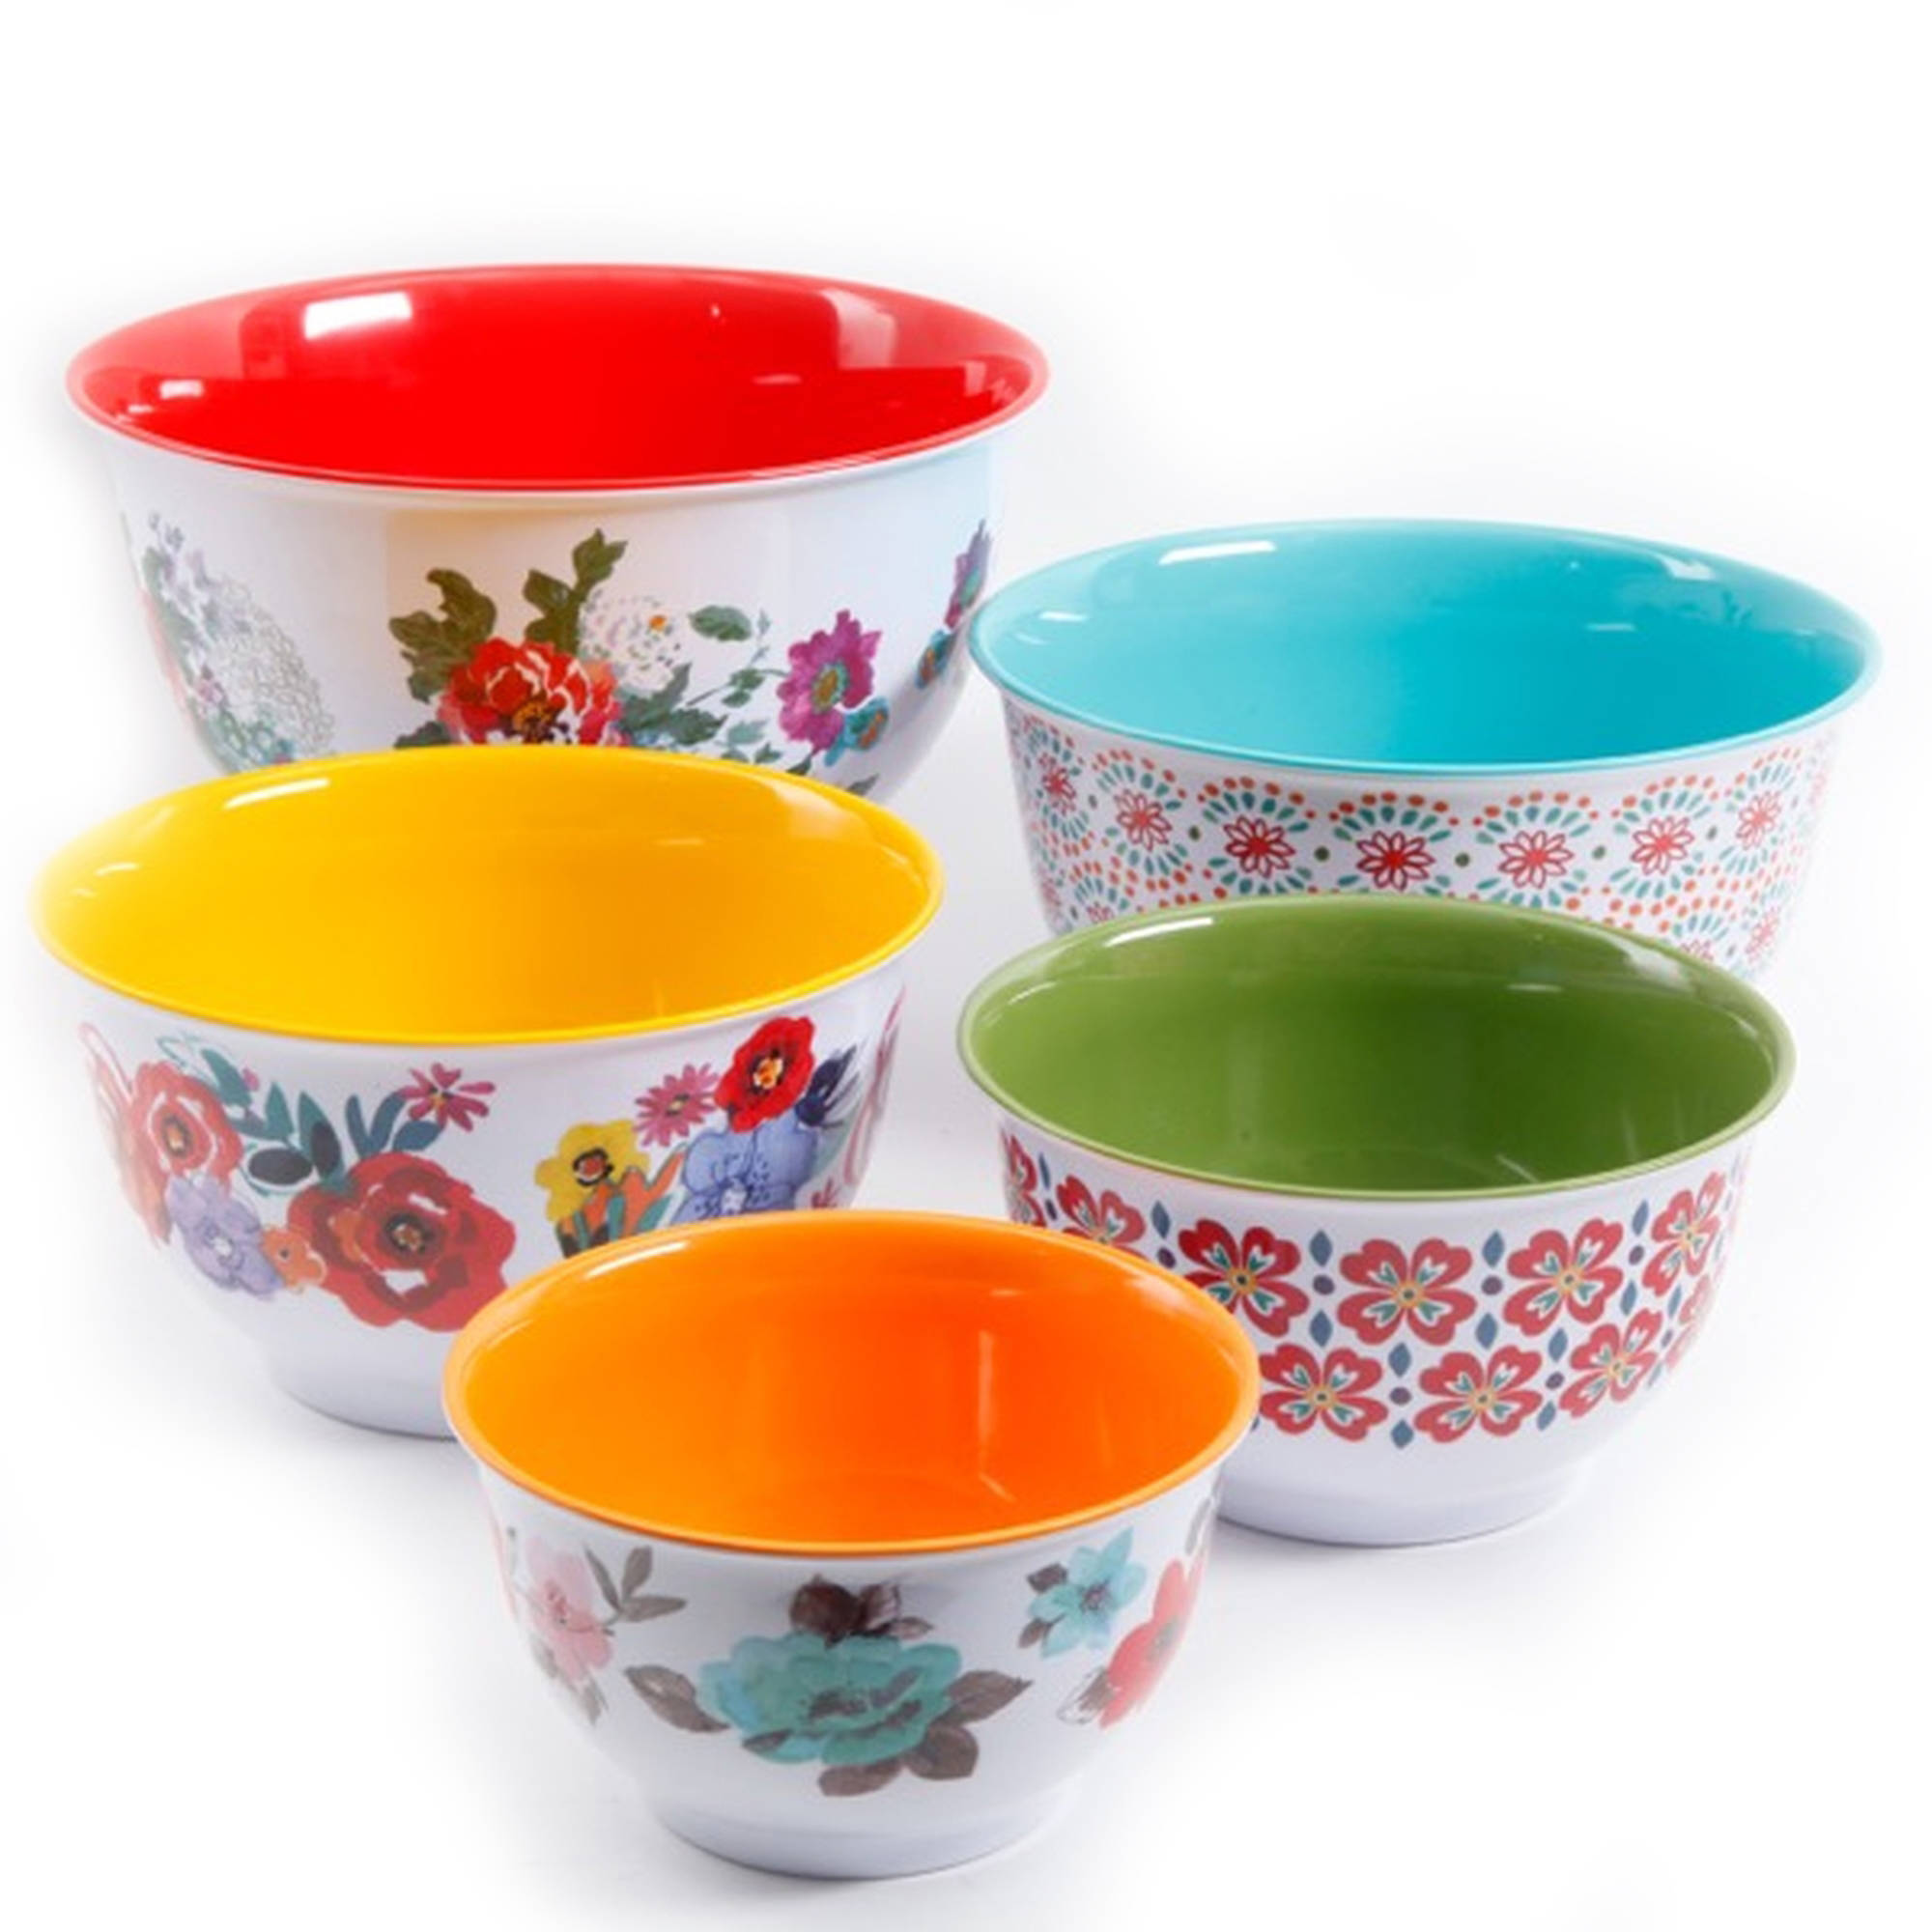 The Pioneer Woman Country Garden Melamine Mixing Bowl Set, 10-Piece Set - image 2 of 7